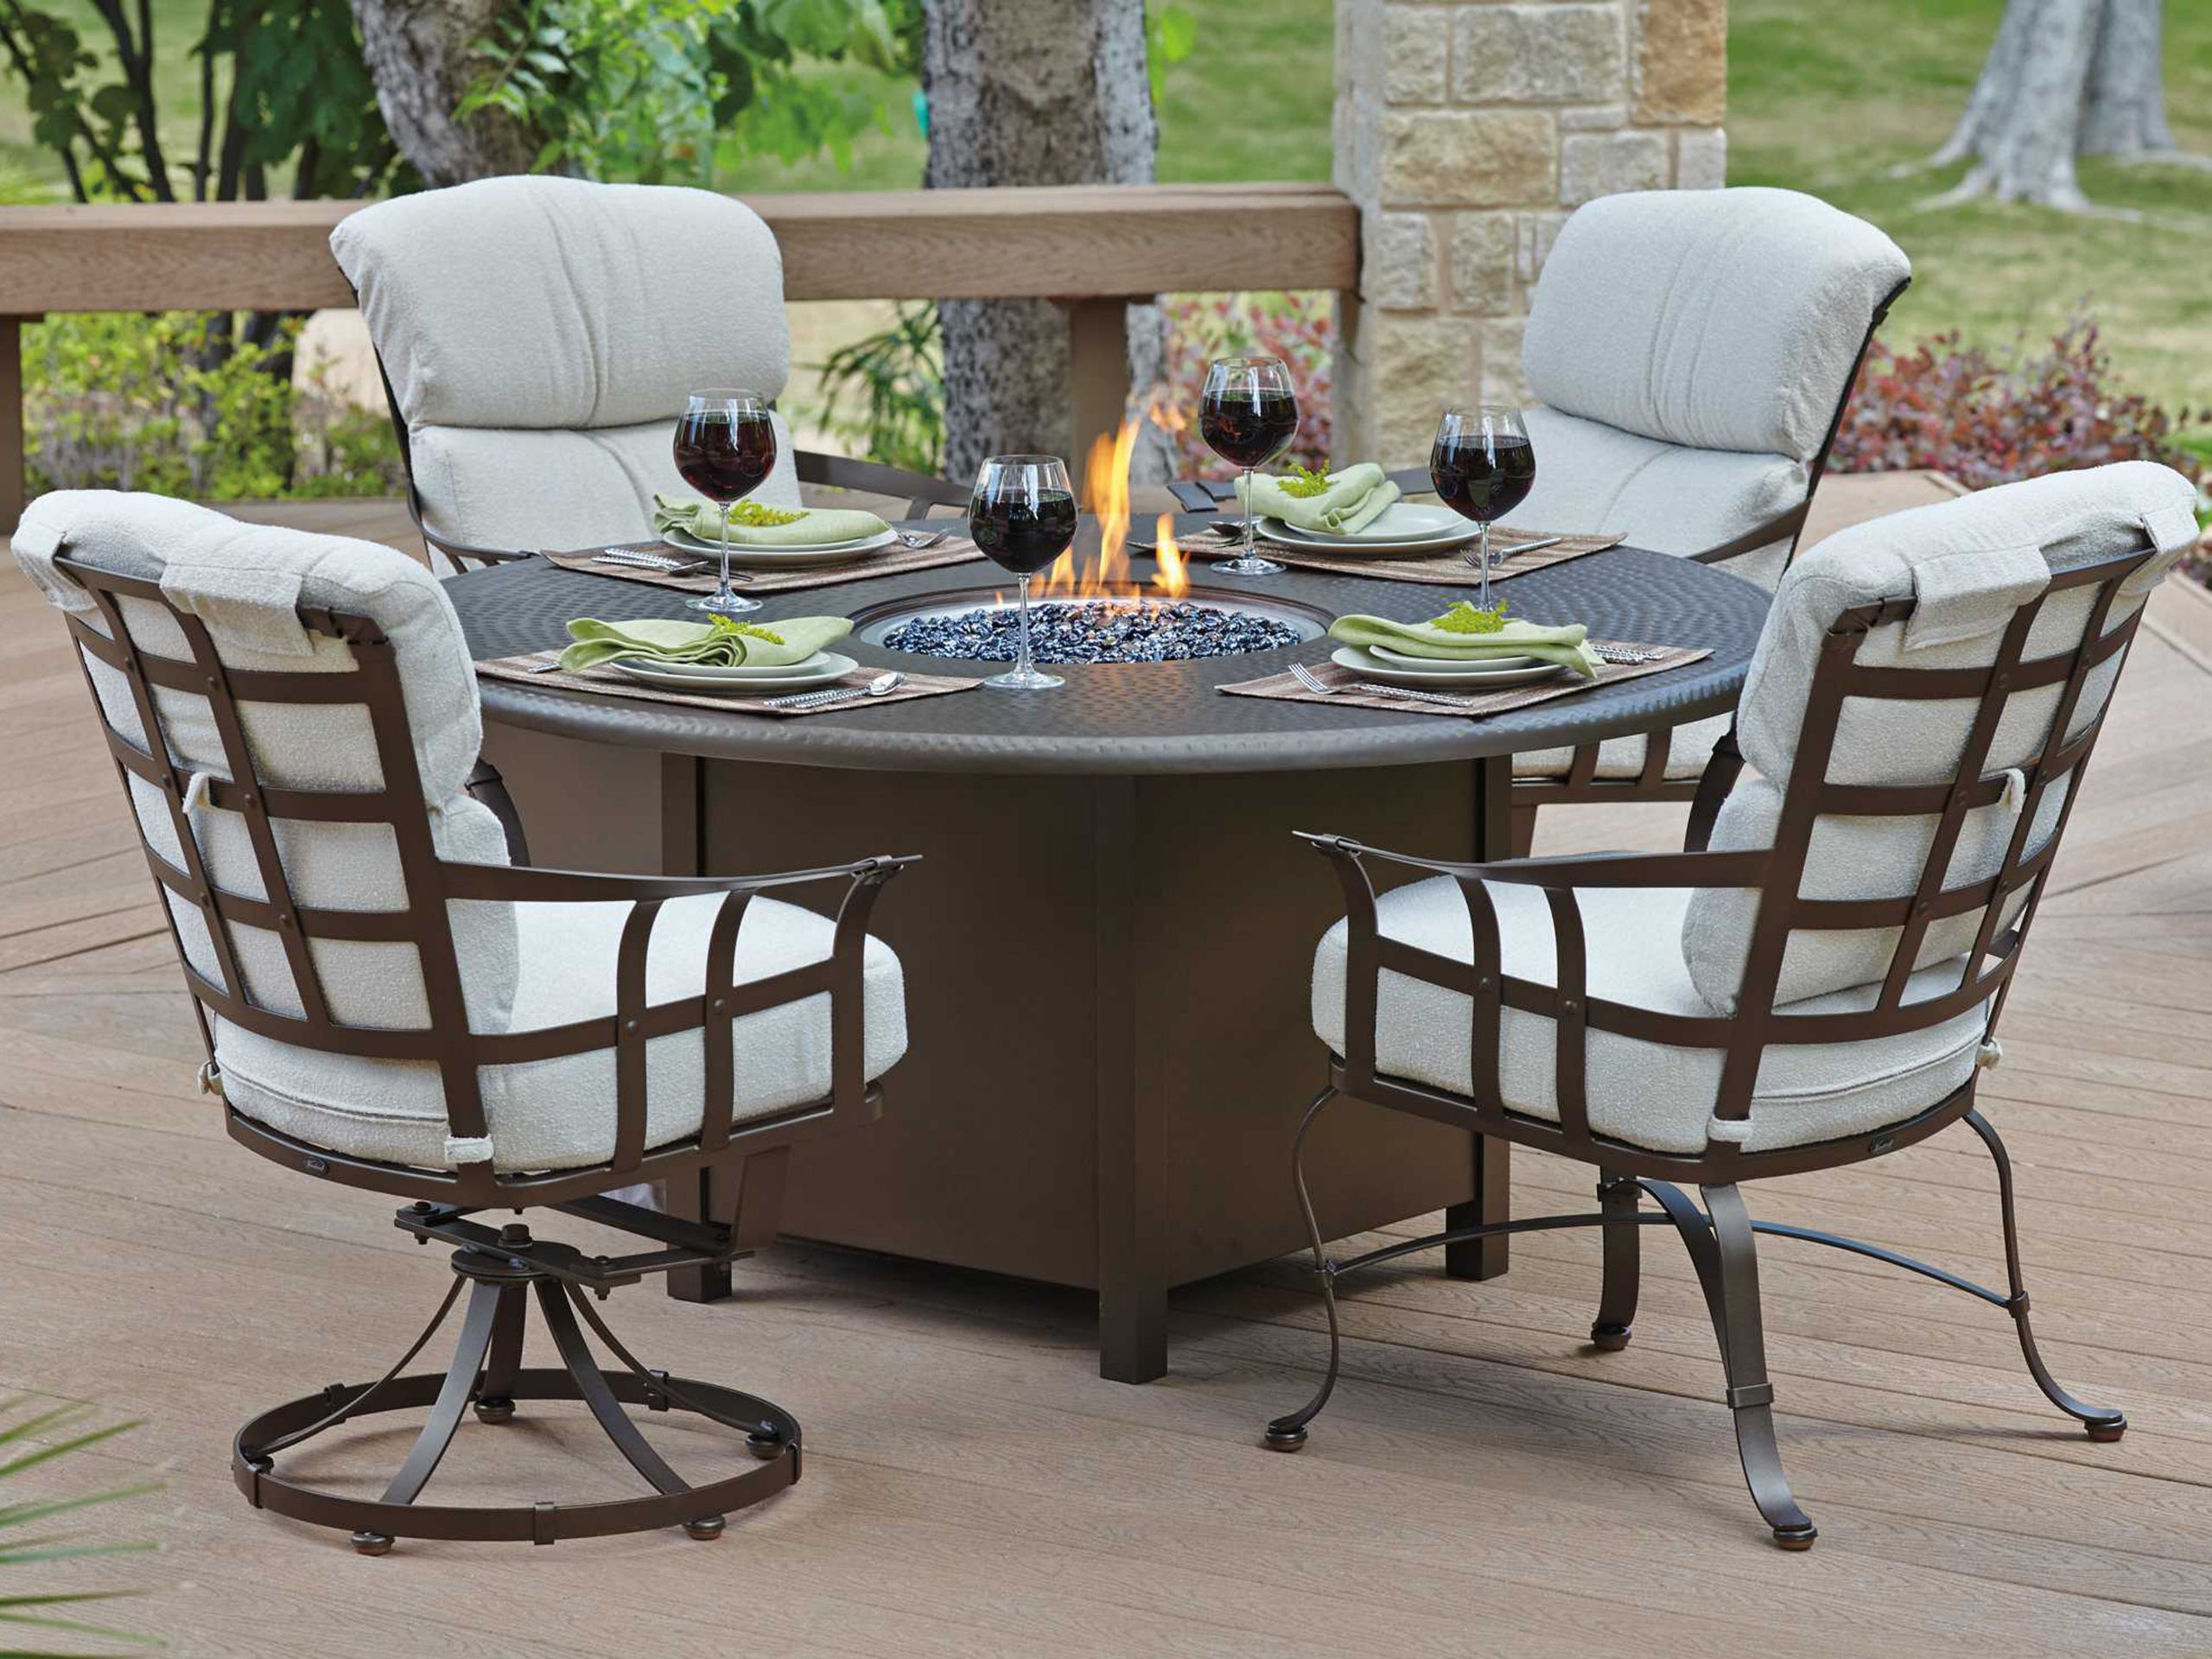 Patio Table With Fire Pit
 View